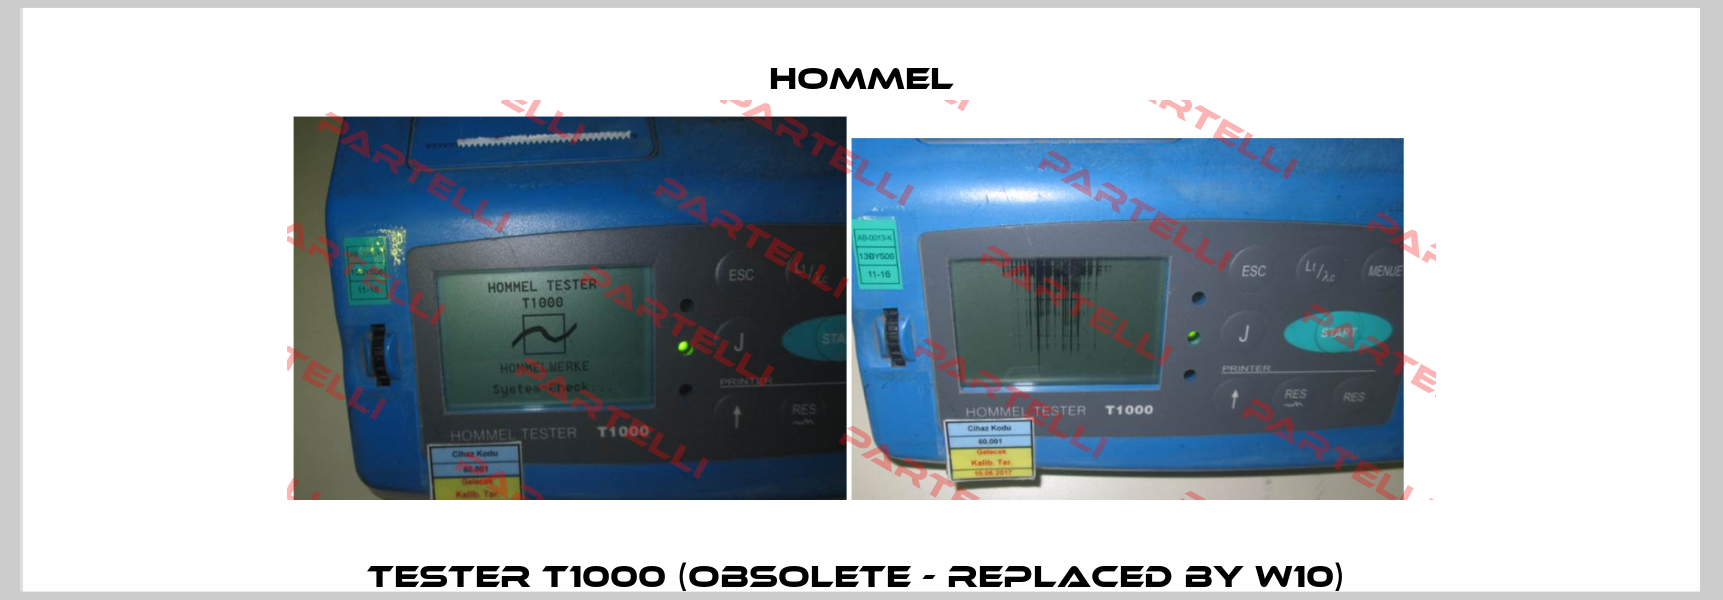 TESTER T1000 (obsolete - replaced by W10)  Hommel